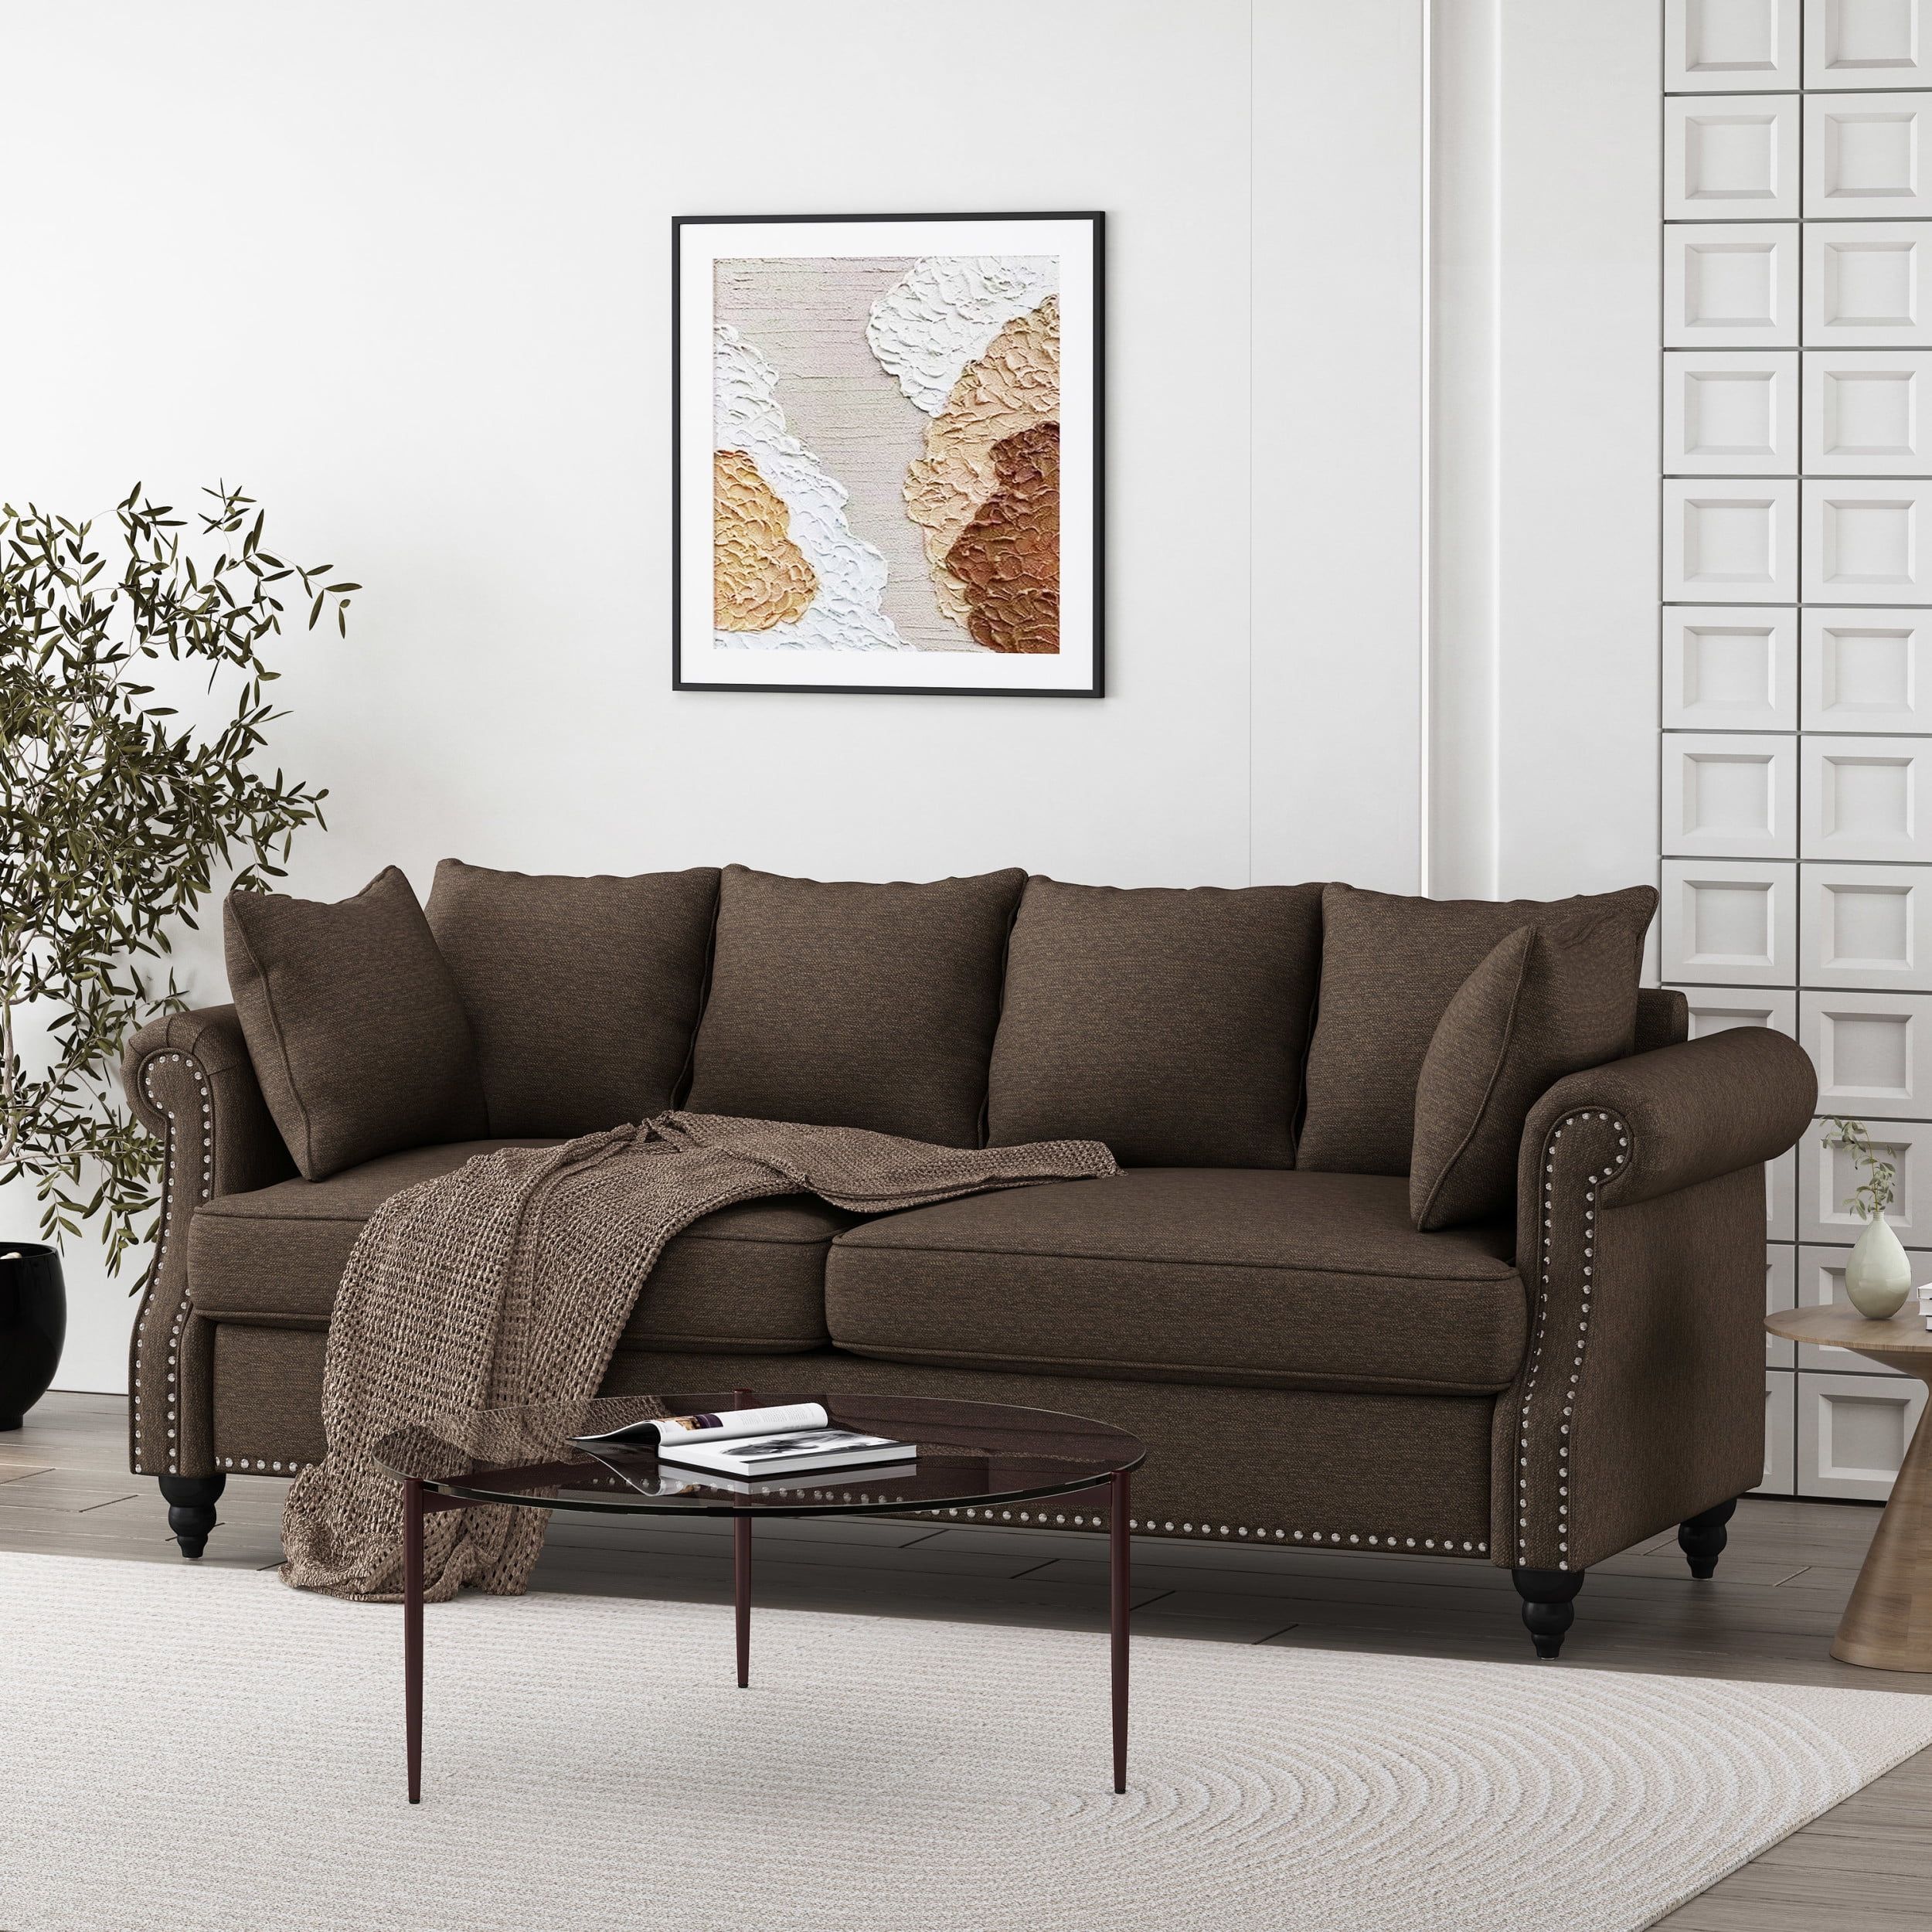 Noble House Viewland Fabric Pillowback 3 Seater Sofa With Nailhead Trim,  Brown And Dark Brown – Walmart In Traditional 3 Seater Sofas (View 9 of 15)